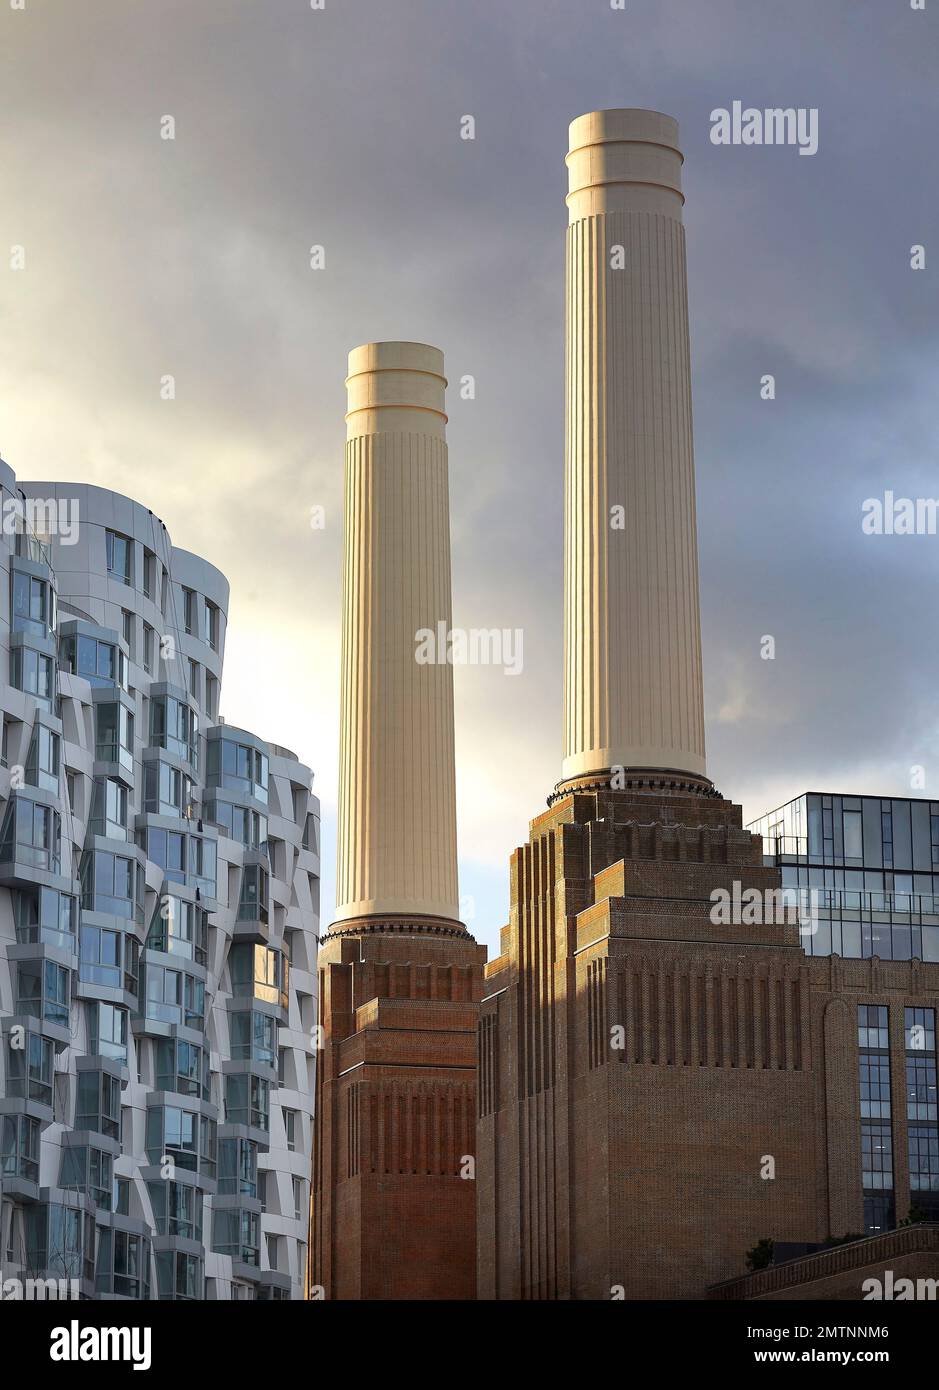 Prospect place in juxtaposition to iconic BPS chimneys. Prospect Place Battersea Power Station Frank Gehry, London, United Kingdom. Architect: Frank G Stock Photo